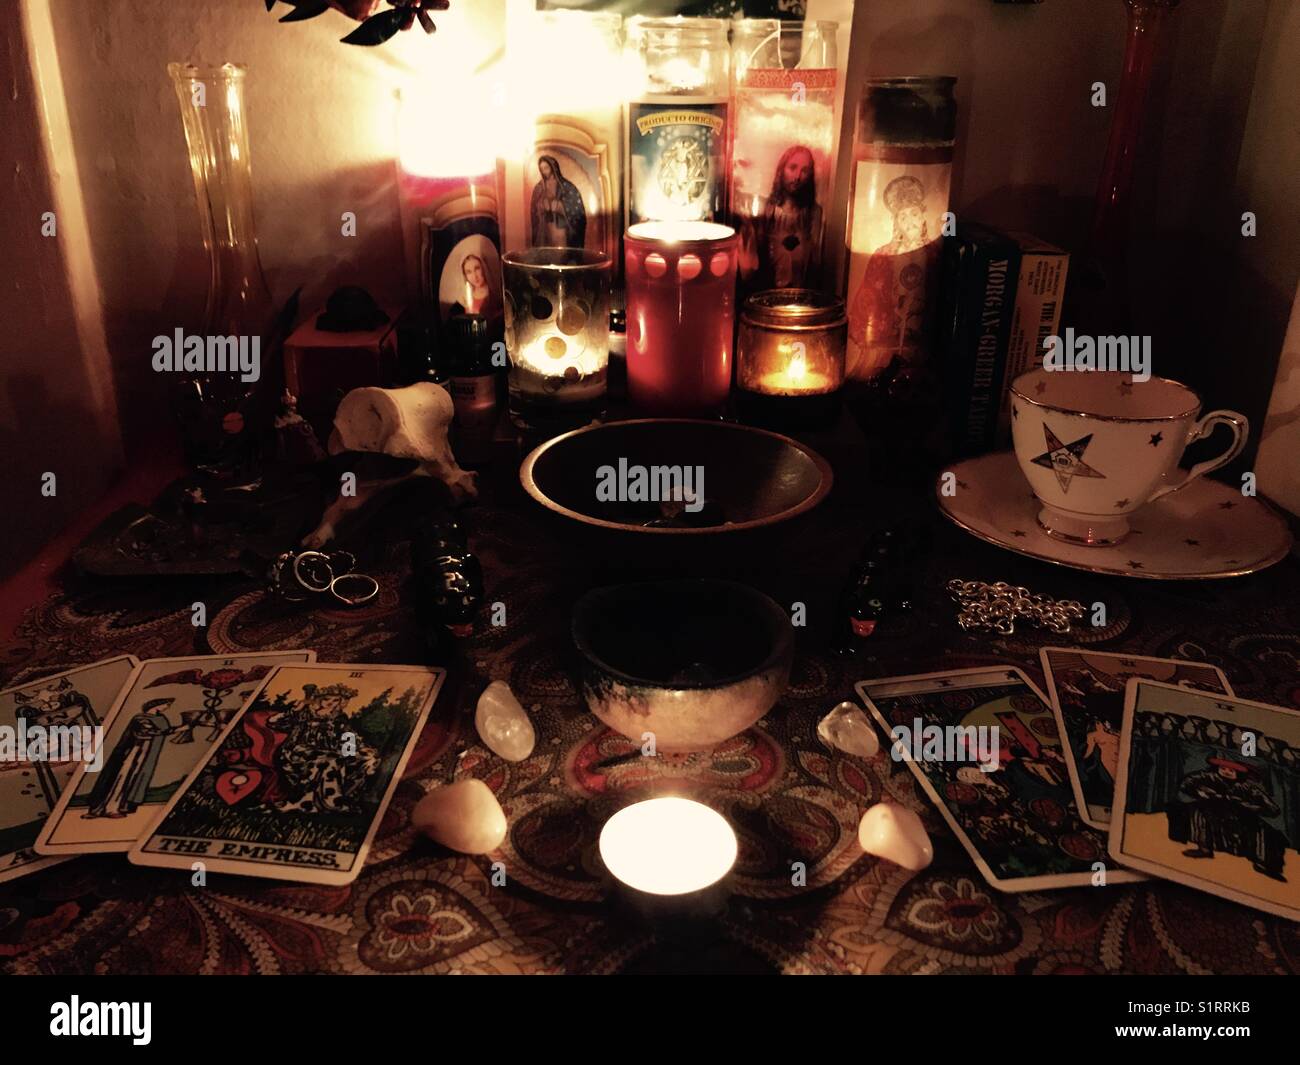 Altar with candles and tarot cards Stock Photo - Alamy